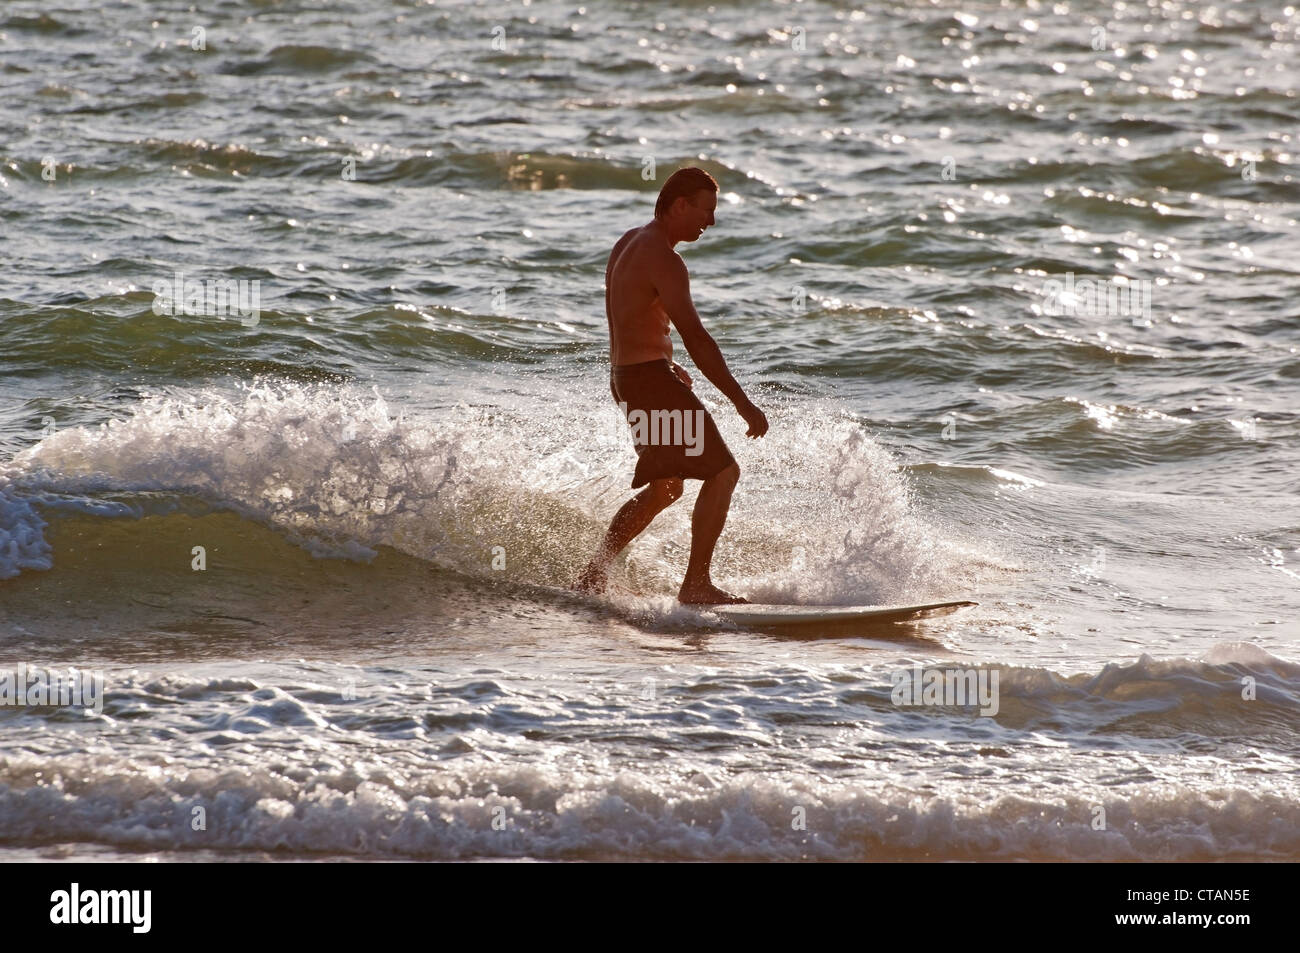 Young surfer enjoying the late afternoon waters of the Gulf of Mexico at Naples Florida. Stock Photo